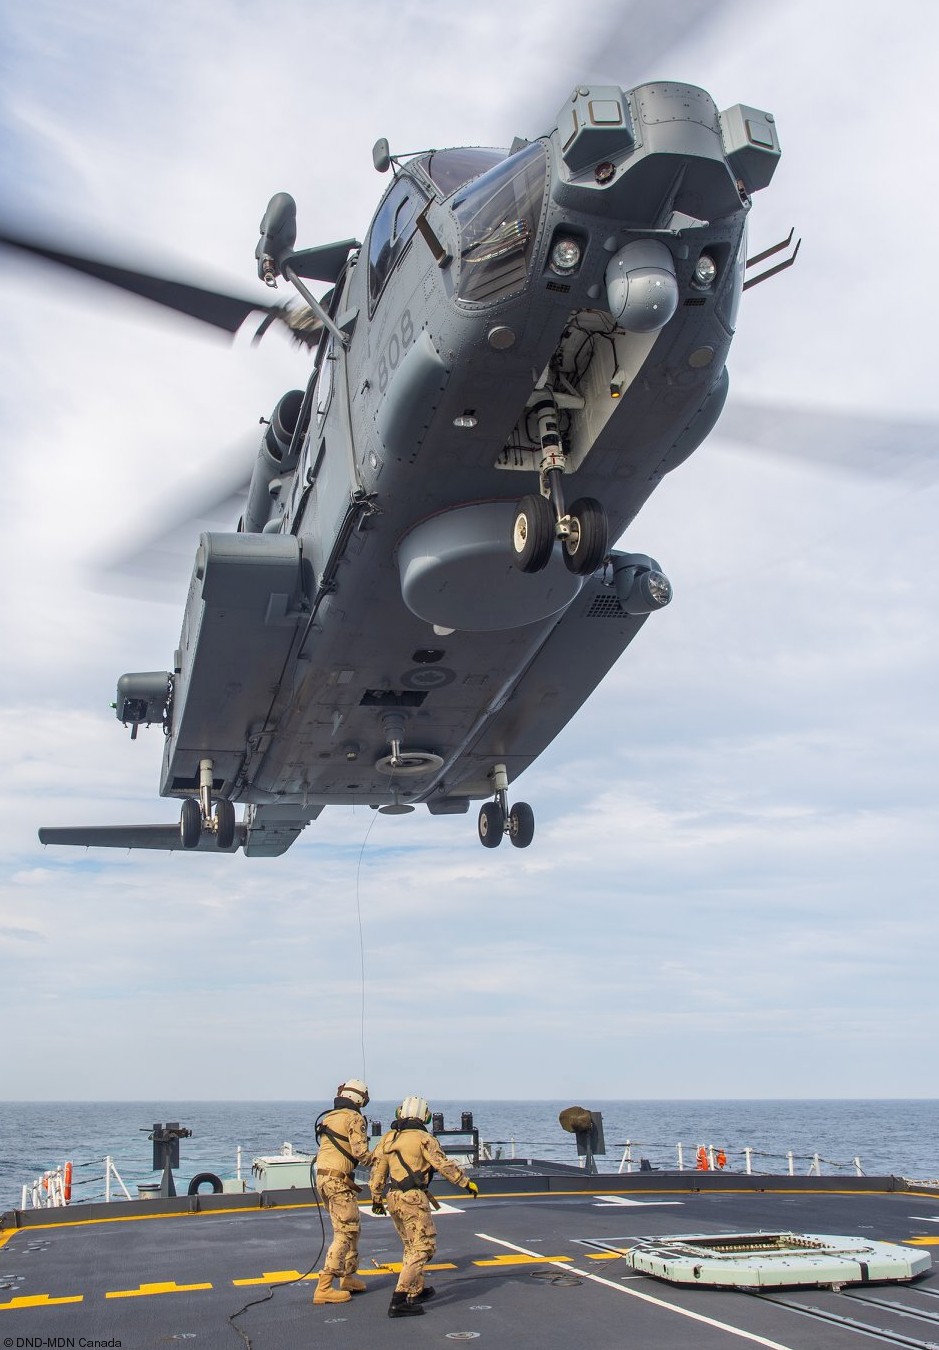 ch-148 cyclone naval helicopter royal canadian air force navy rcaf sikorsky hmcs 406 423 443 maritime squadron 49